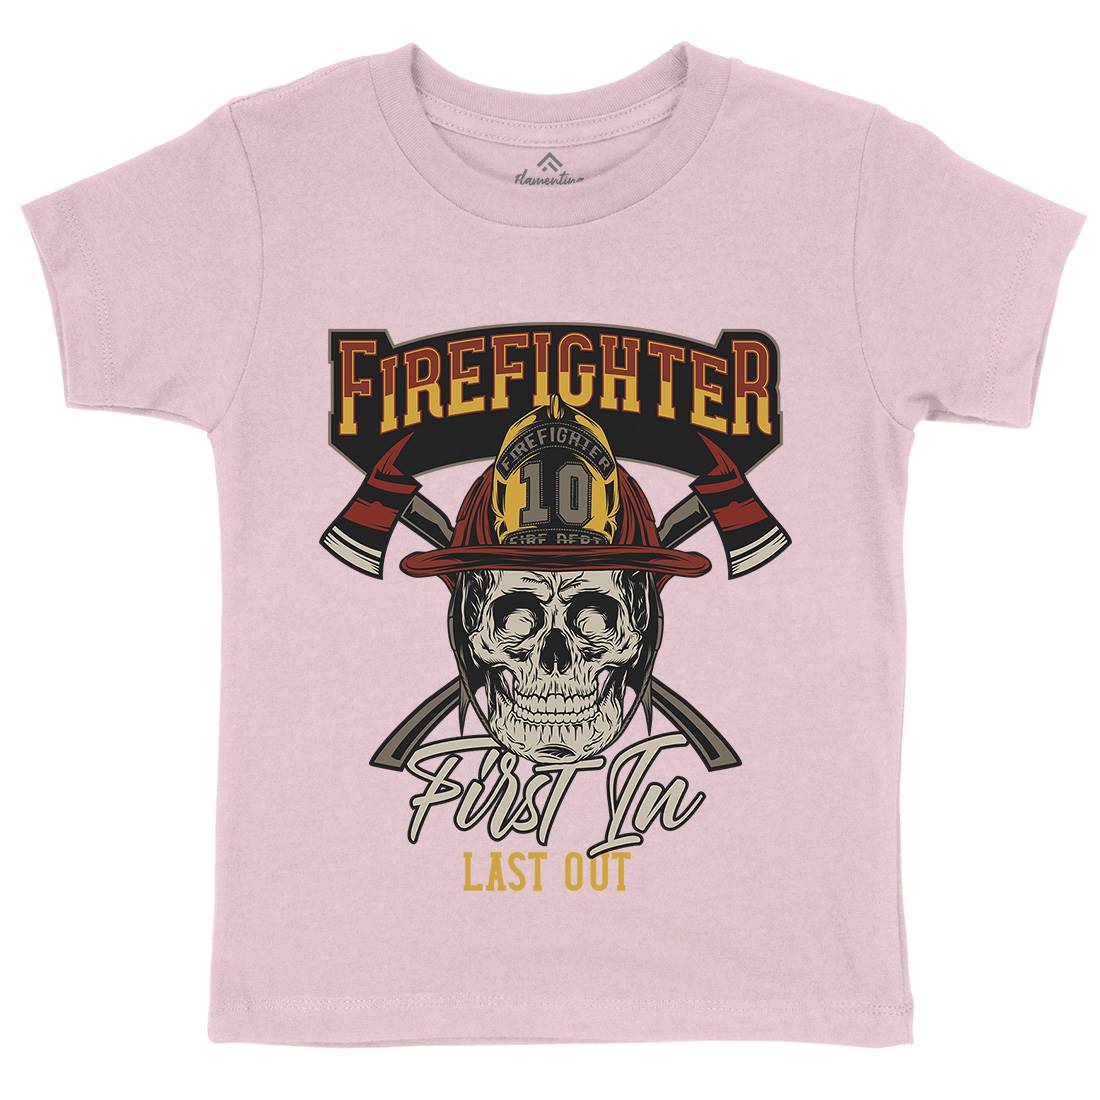 First In Last Out Kids Crew Neck T-Shirt Firefighters D933